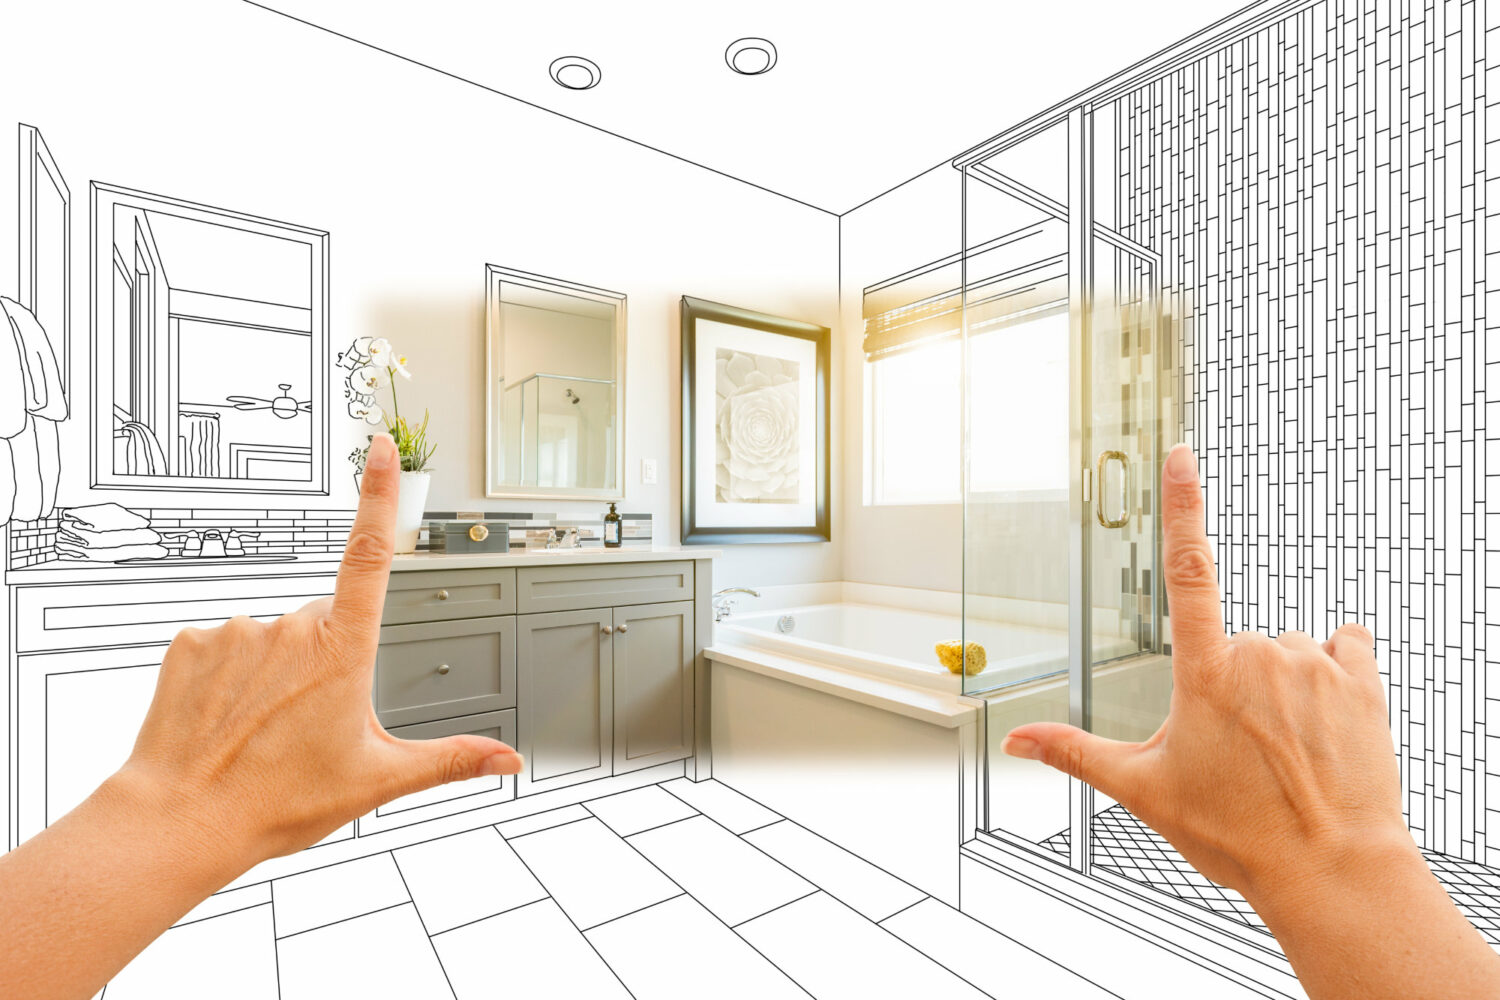 5 Tips for Finding the Best Bathroom Contractor Near You